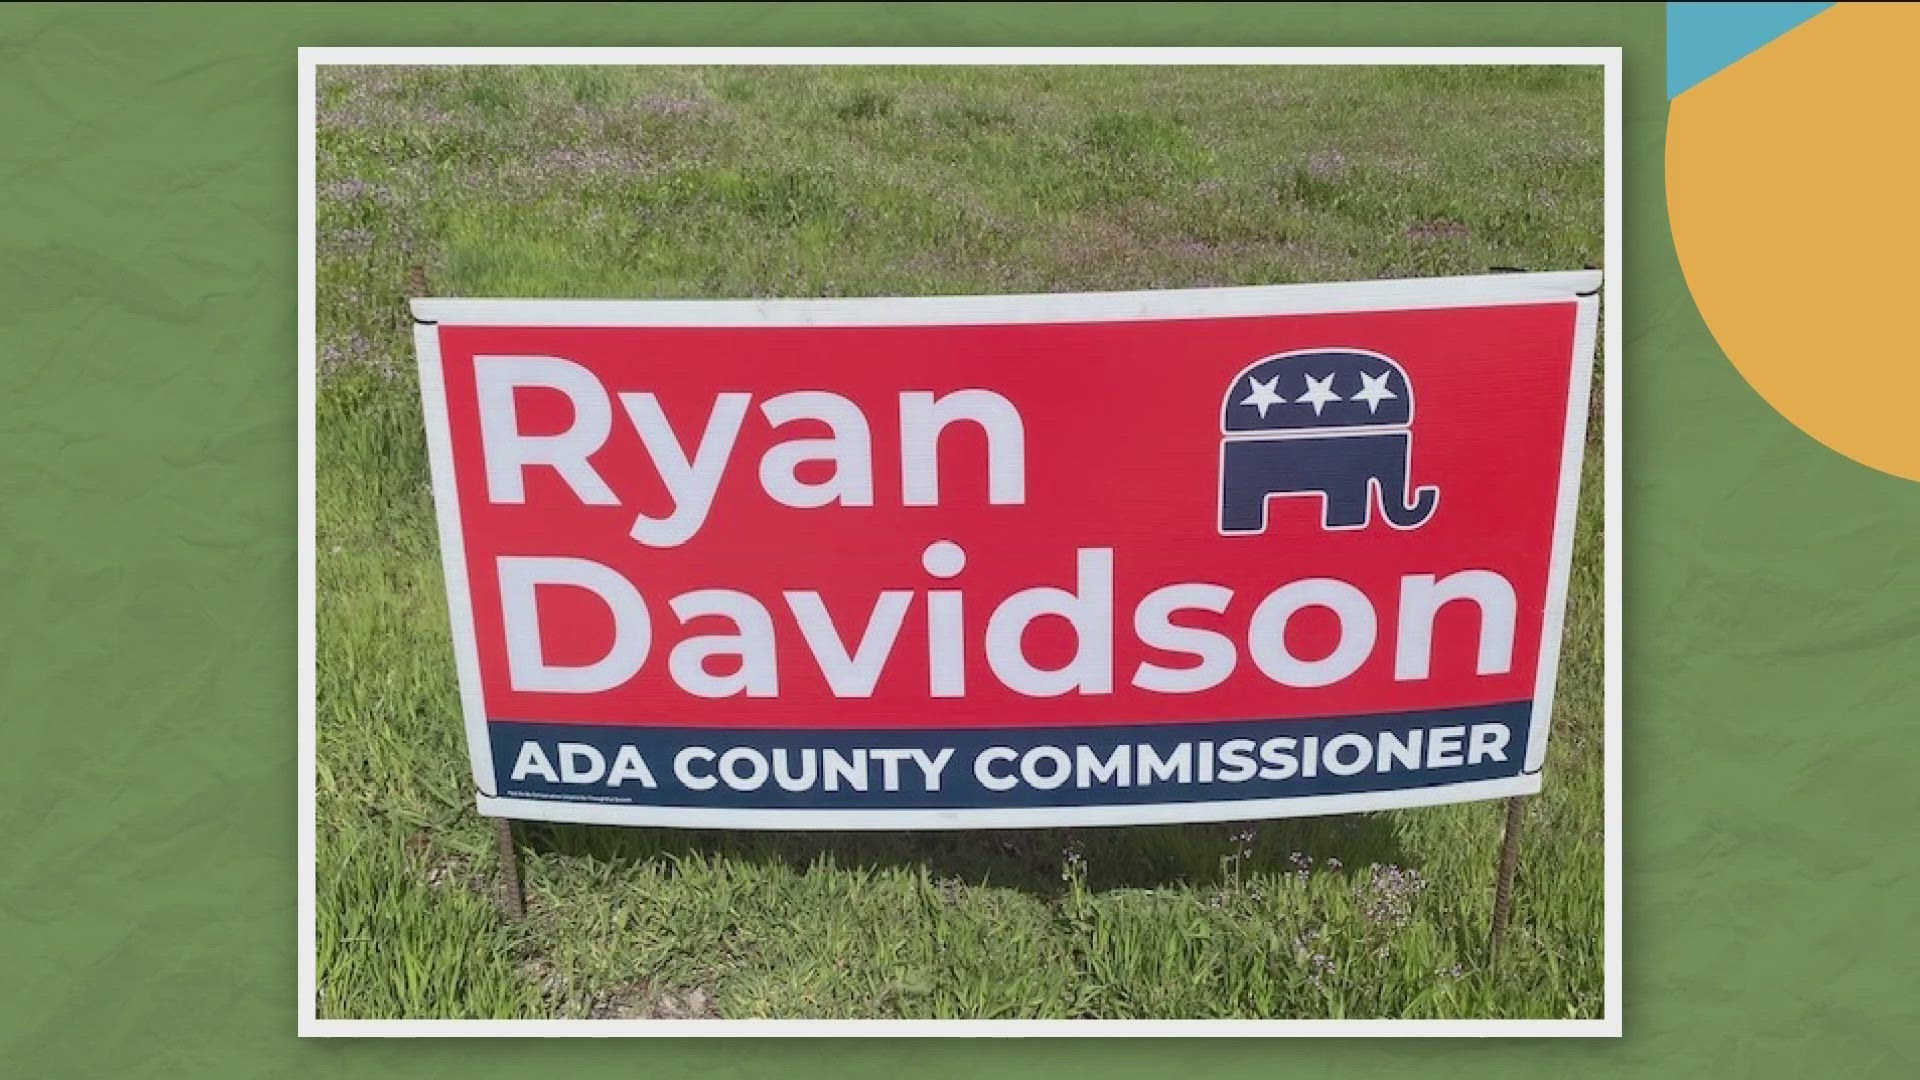 Another day, another complaint over a candidate's campaign signs for Ada County's next commissioner.